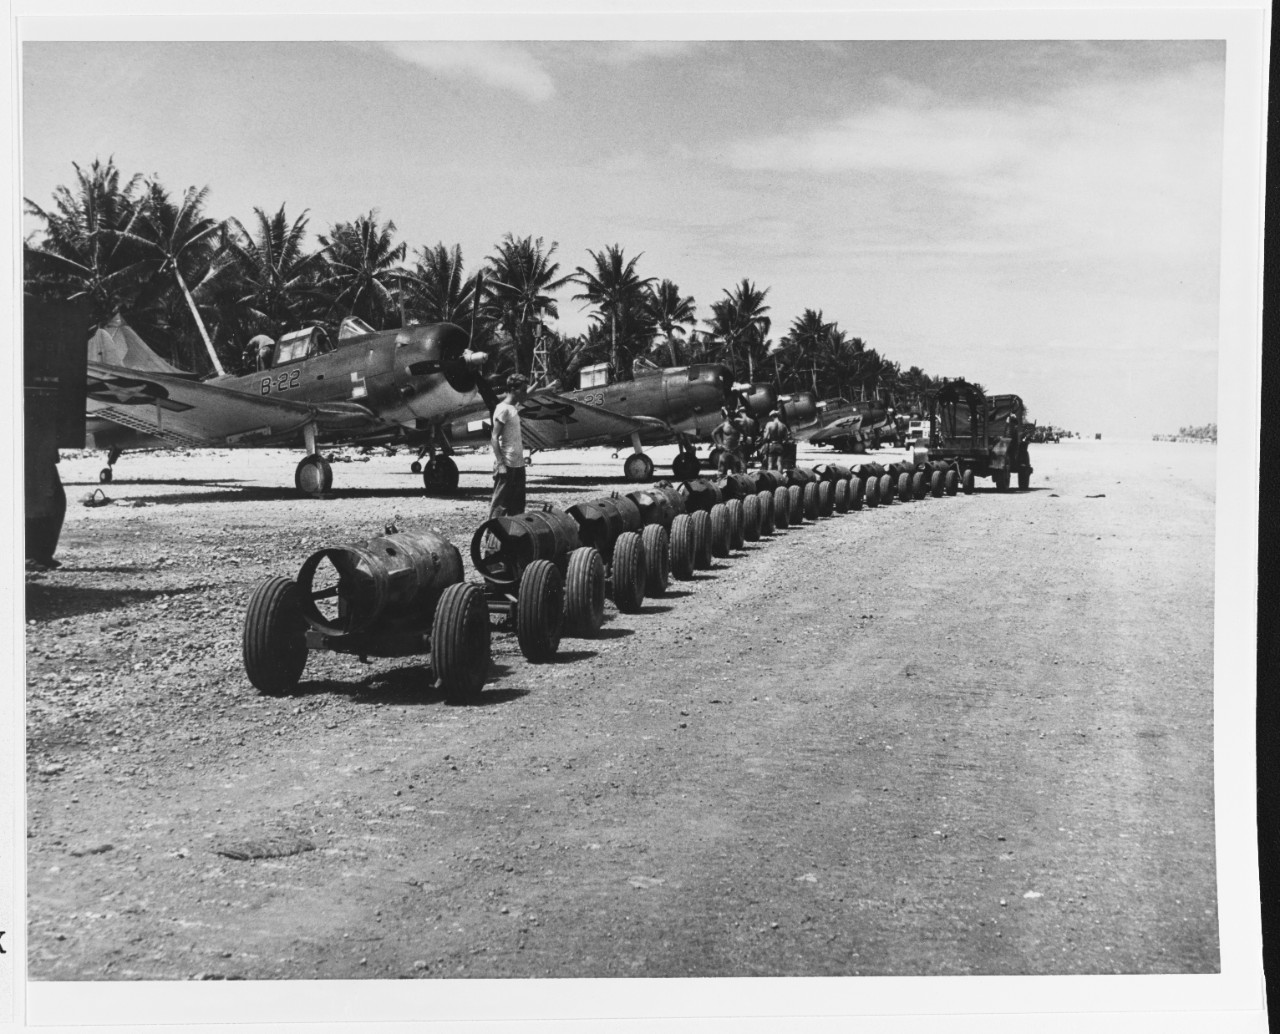 Majuro Island, Majuro Atoll, Marshall Islands. Bombs are wheeled up to the flight line, to be loaded on the SBD-5 bombers parked there, March 1944. Photographed by Lieutenant Commander Charles Kerlee, USNR.